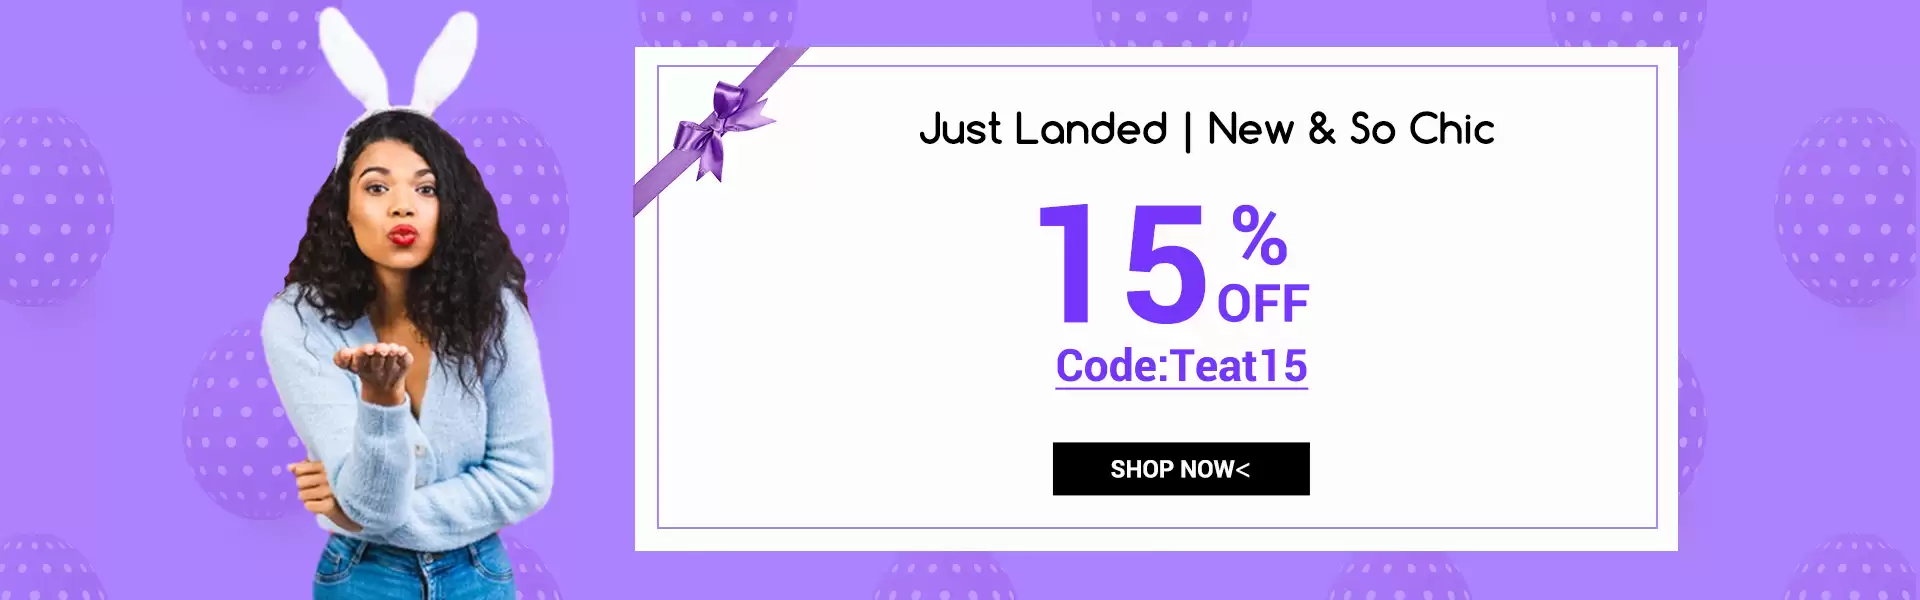 Grab Extra 15% Off On New Wigs Styles With This Discount Coupon At Jurllyshe.Com